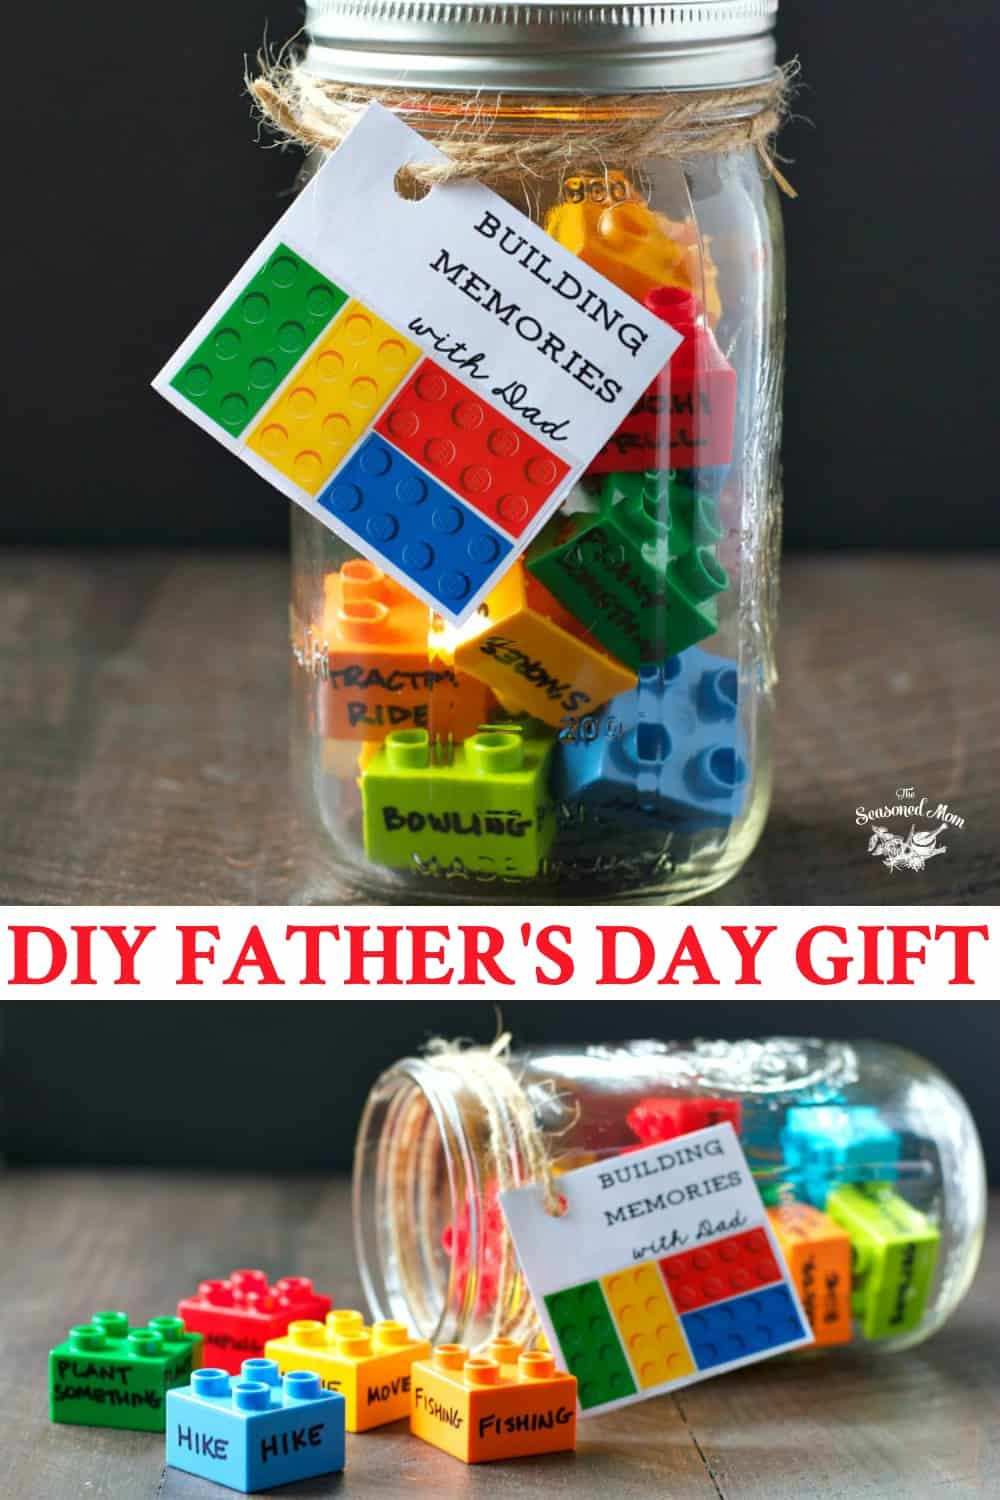 Father'S Day Grilling Gift Ideas
 DIY Father s Day Gift Building Memories with Dad The